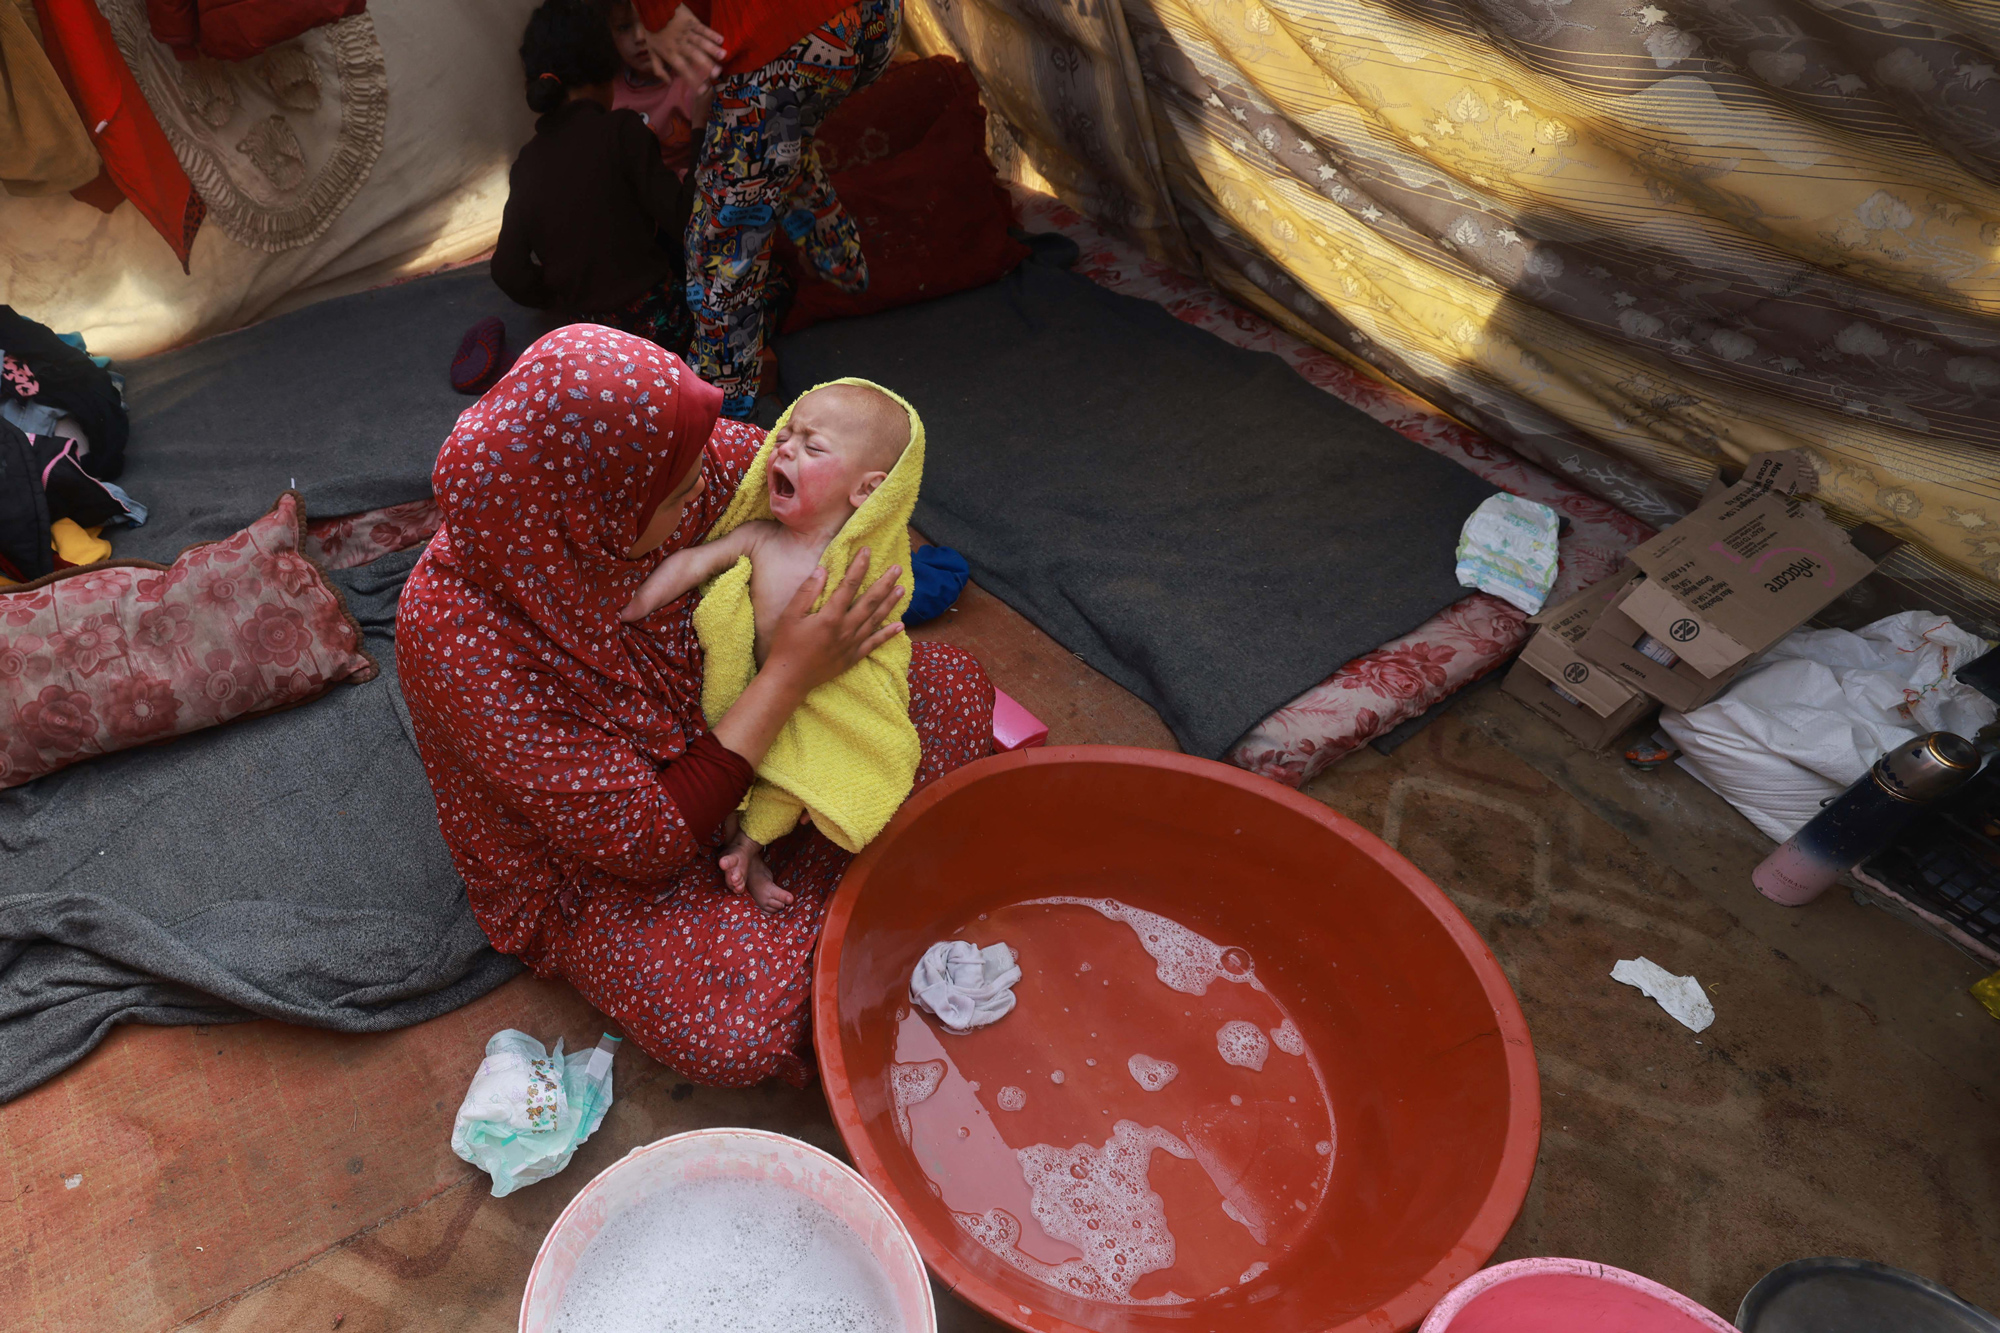 A woman dries a baby in a towel after giving it a bath, inside a tent at a camp for displaced Palestinians in Rafah, southern Gaza, on January 18.